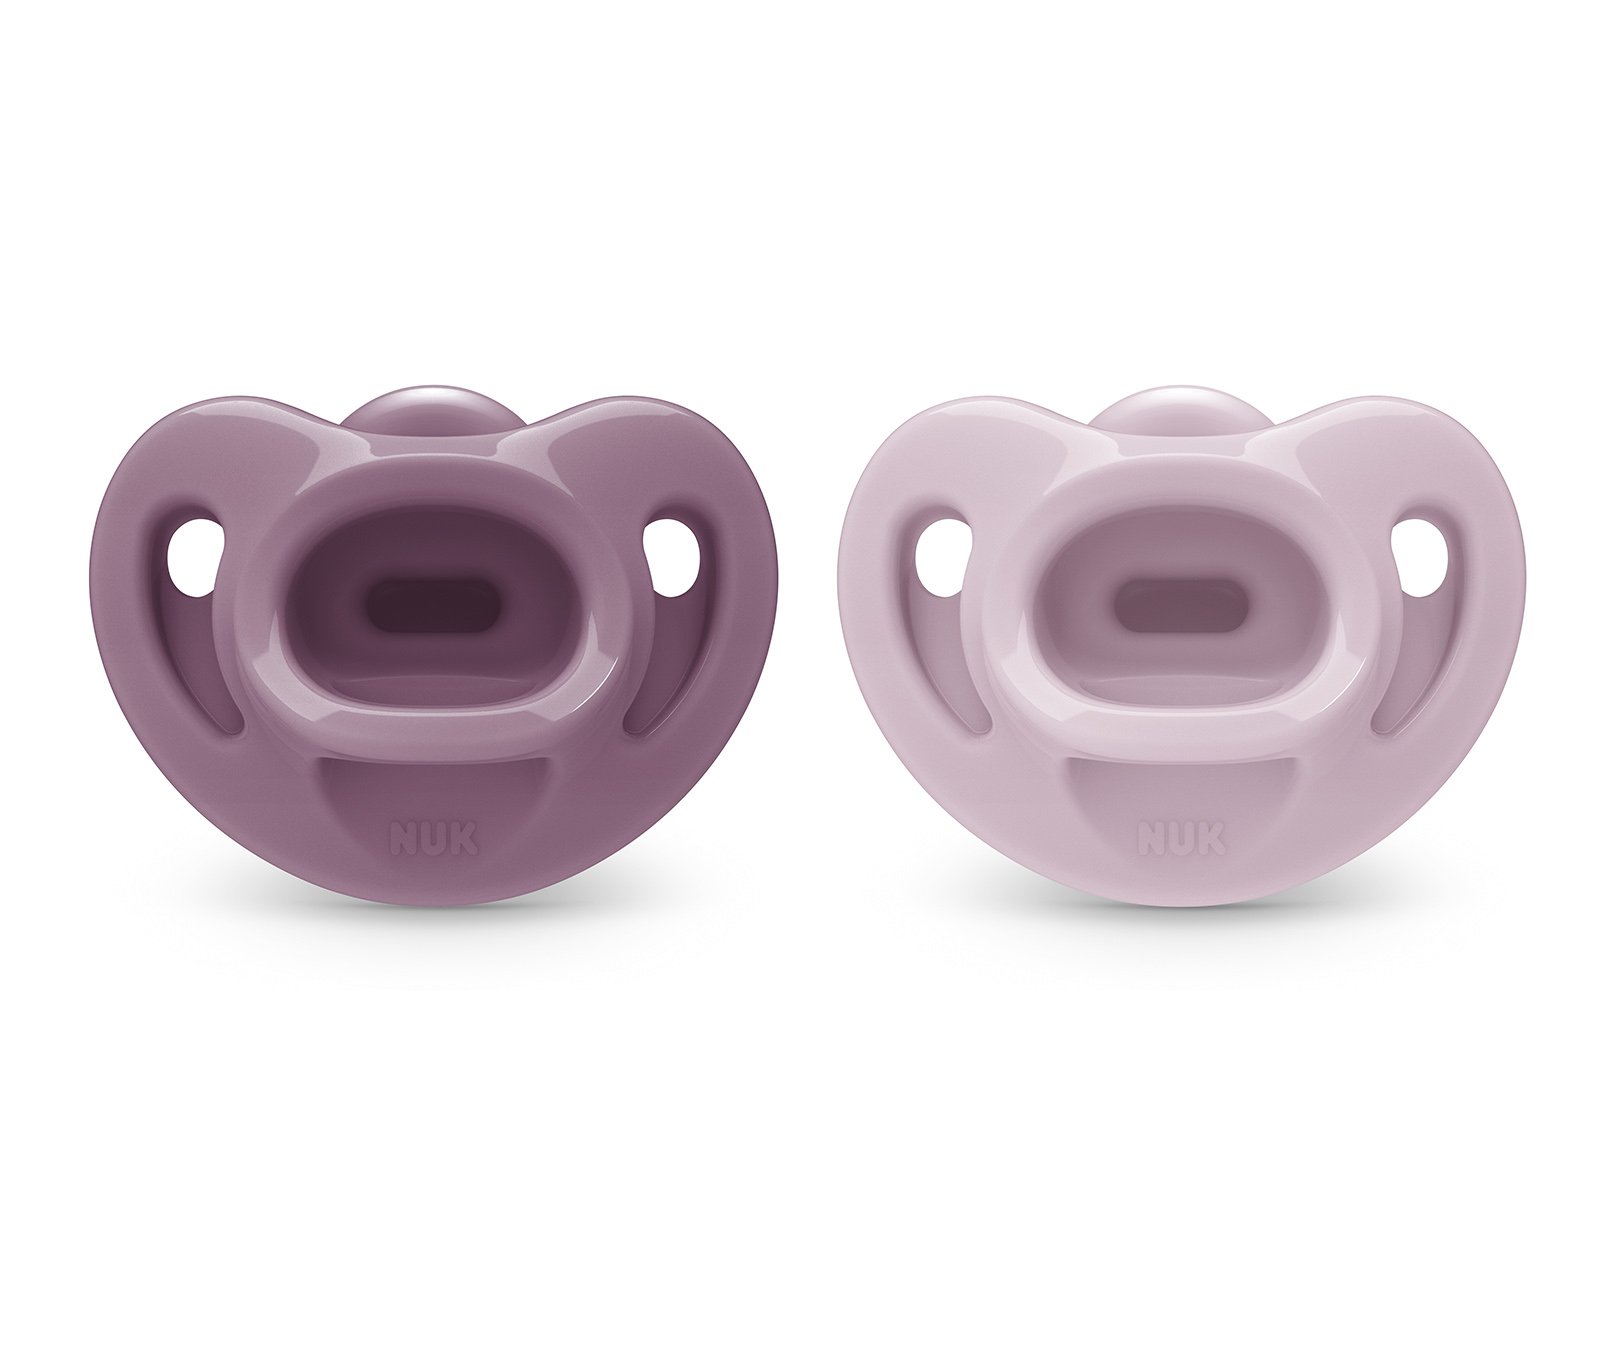 In Hand Review of Comfy Package Plastic Portion Cups With Lids 